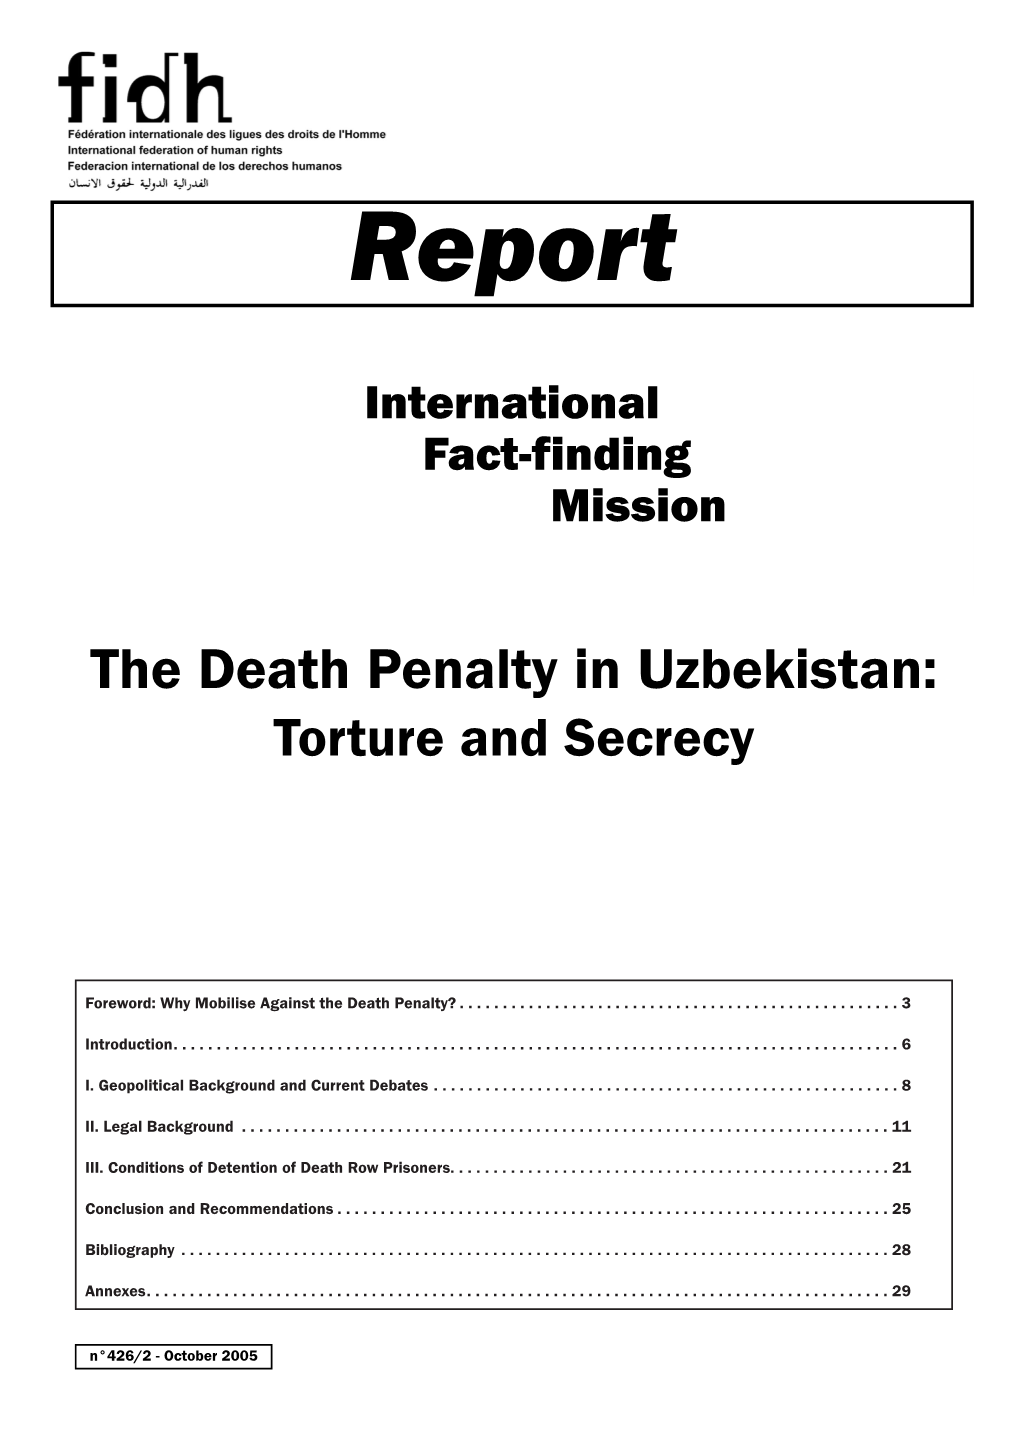 The Death Penalty in Uzbekistan: Torture and Secrecy